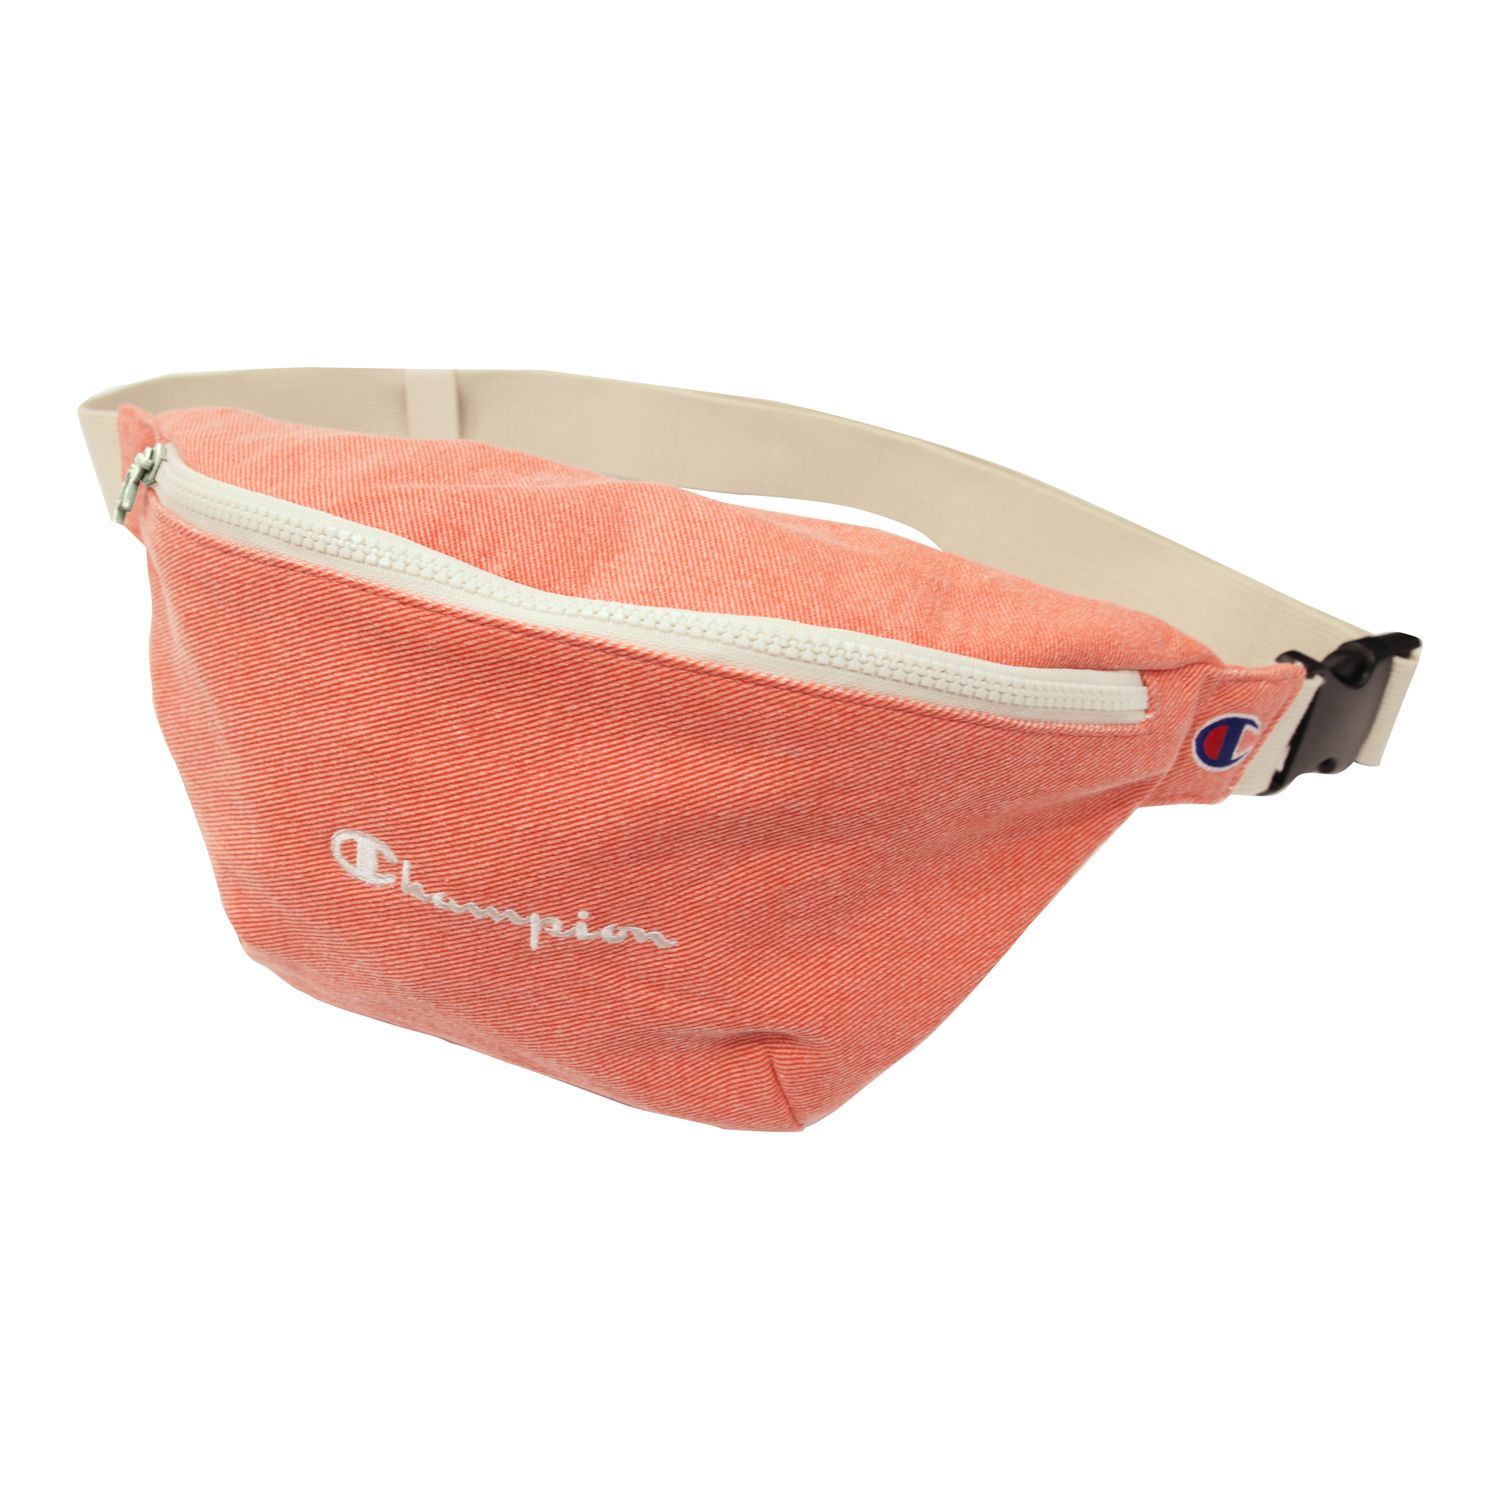 champion fanny pack red